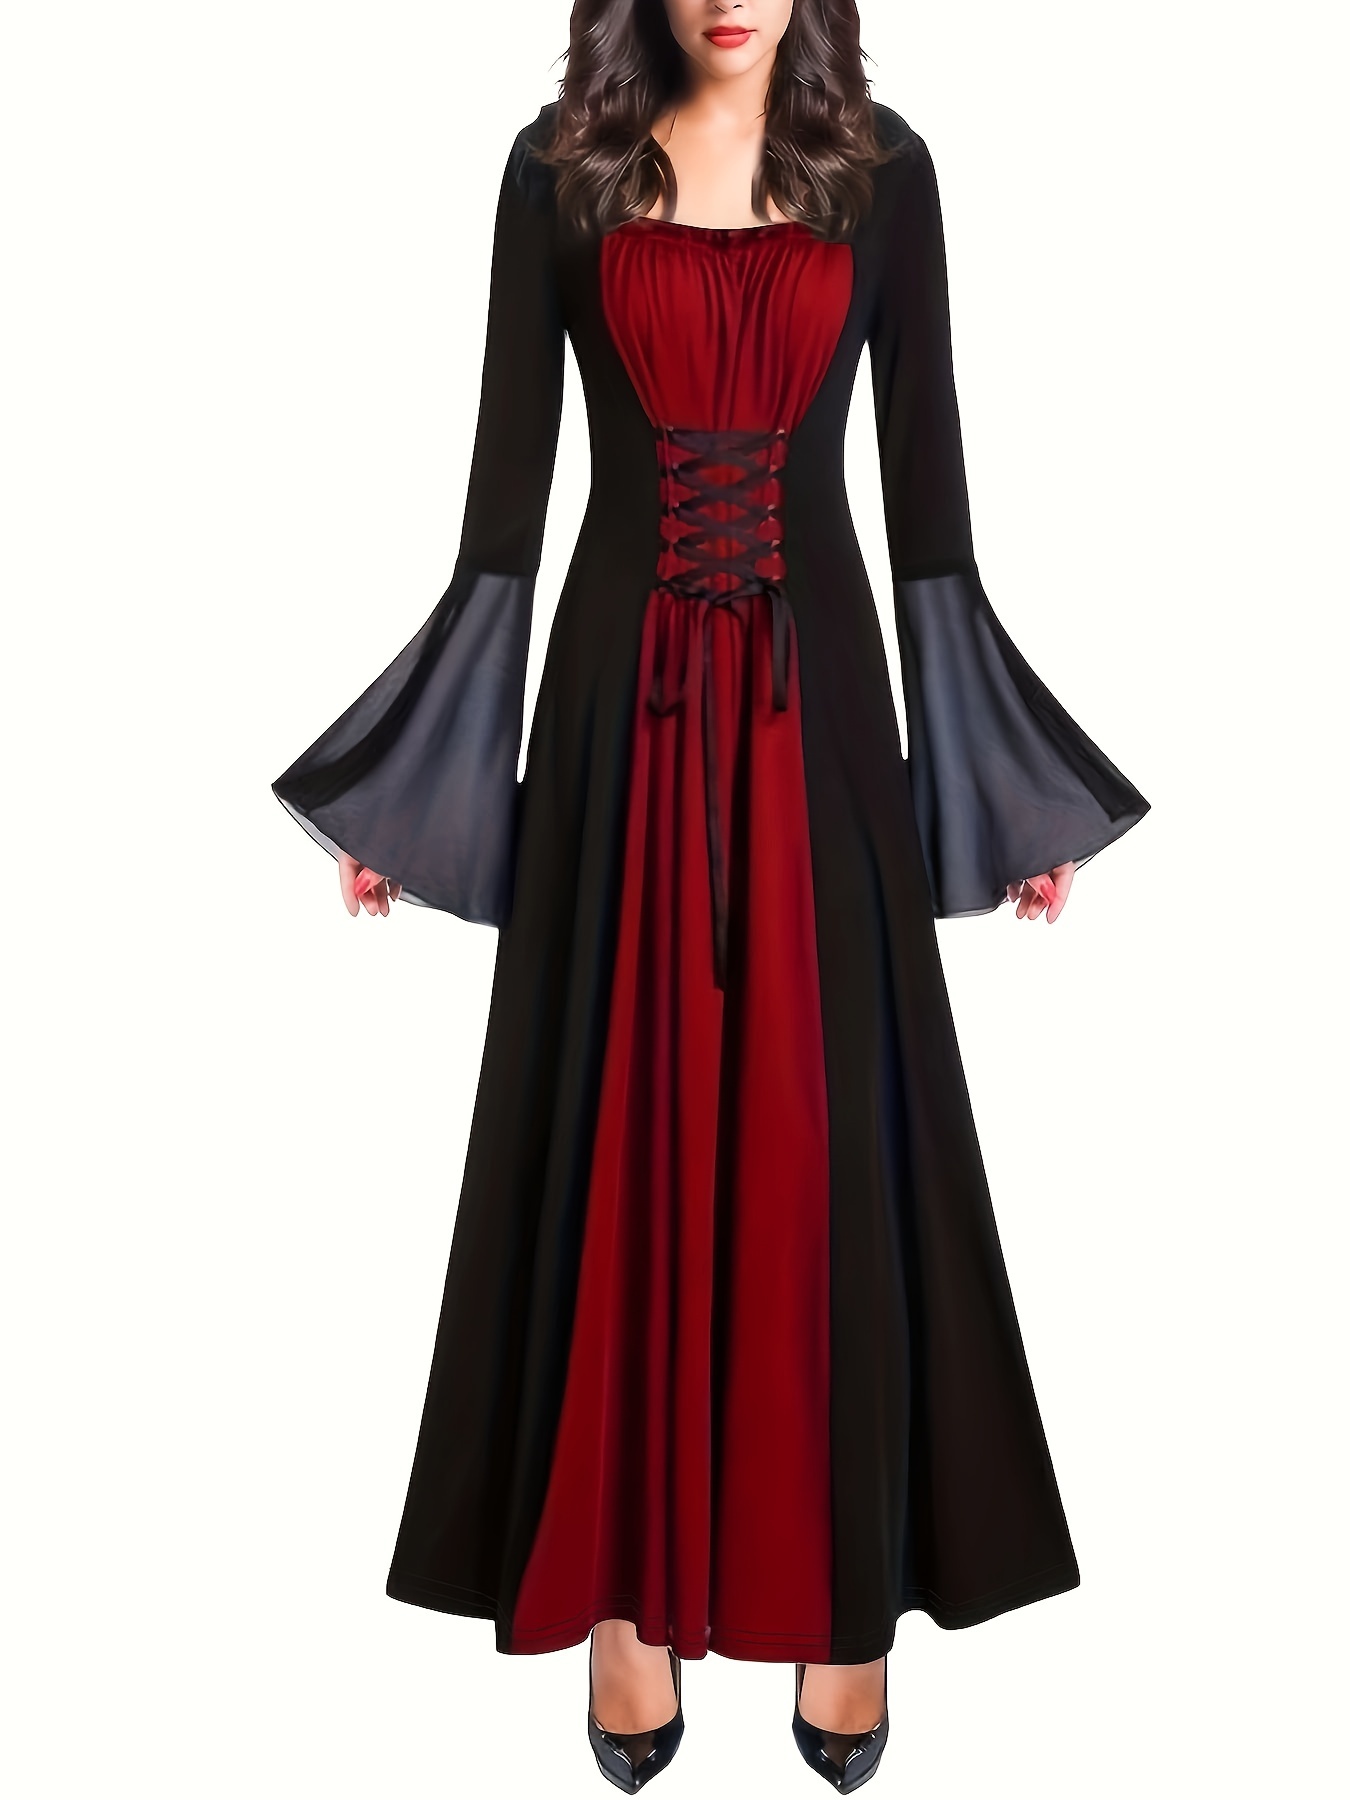 Chic goth corset dress In A Variety Of Stylish Designs 